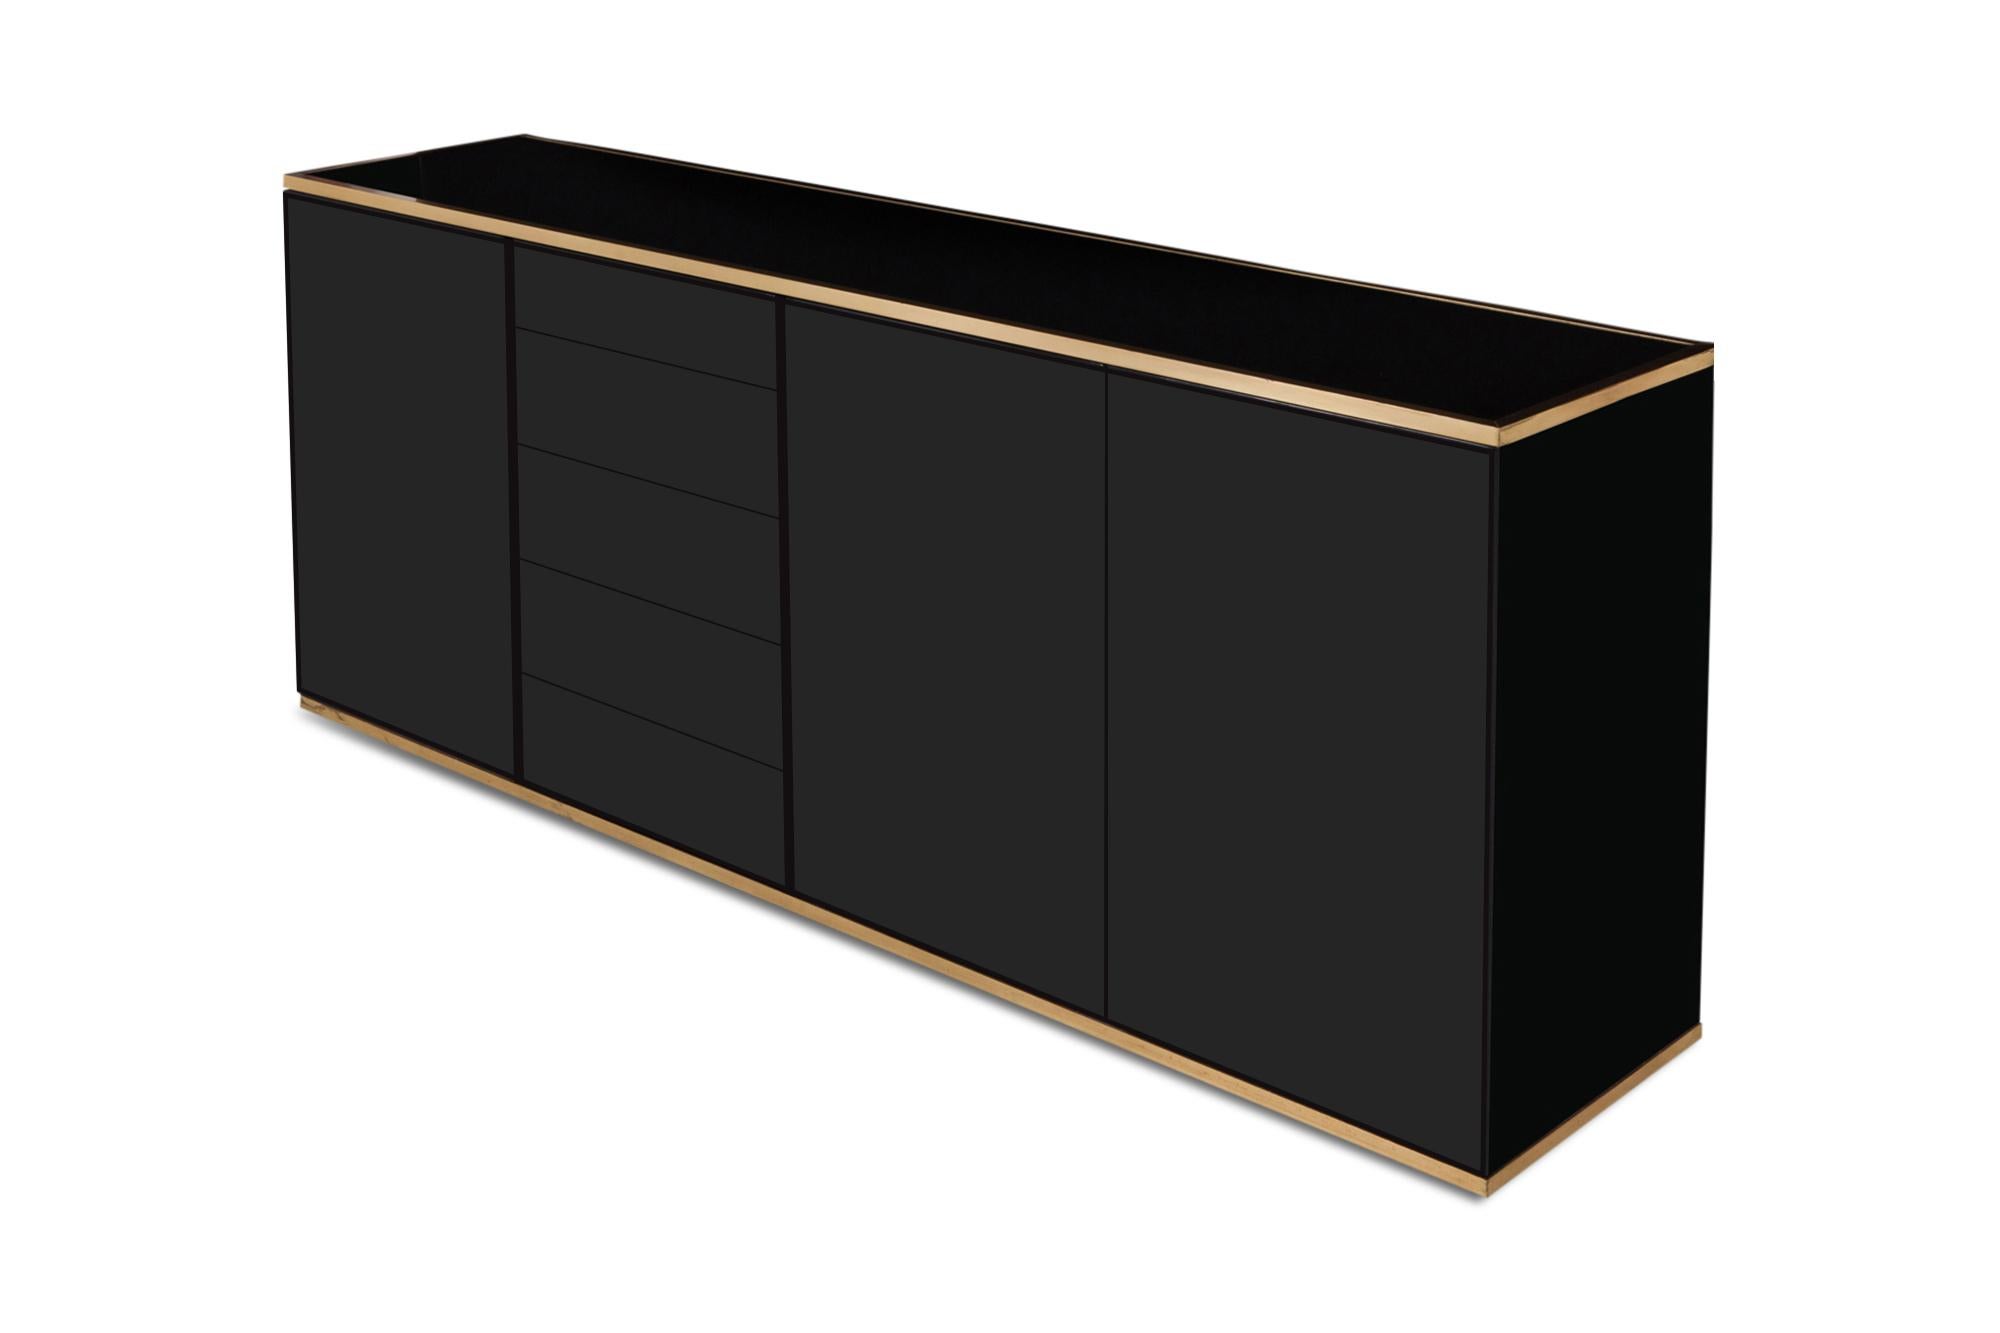 Black lacquered Minimalist Hollywood Regency sideboard
Manufactured by Roche Bobois, France, 1980s.

Brass detailing on the top and bottom of the credenza and on the inside shelves.

Measures: L 204 cm x D 45 cm x H 80 cm.

 